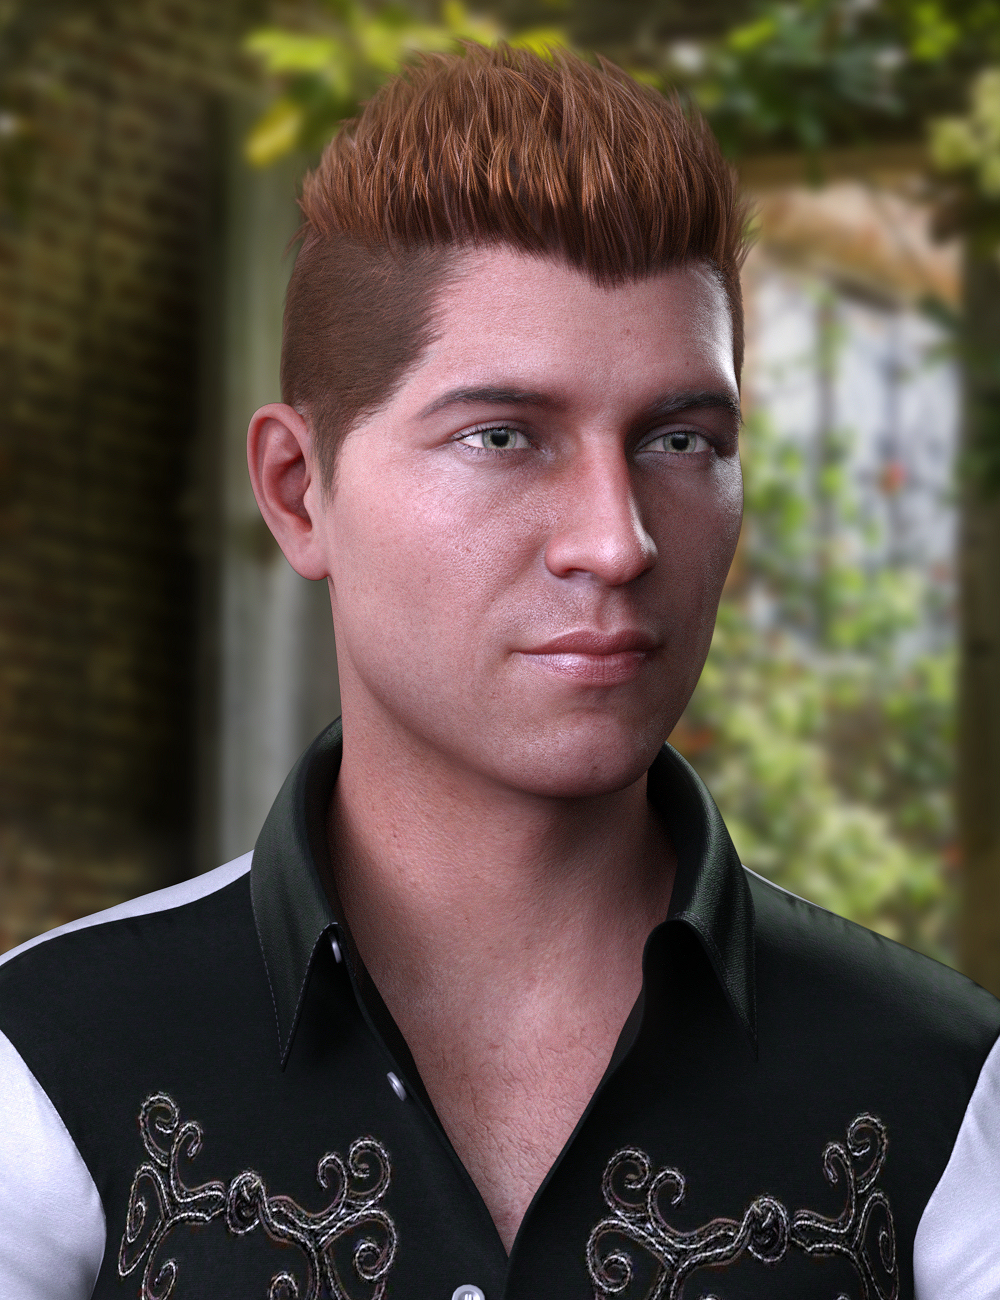 dForce Jason Hair for Genesis 8 and 8.1 Males by: Propschick, 3D Models by Daz 3D